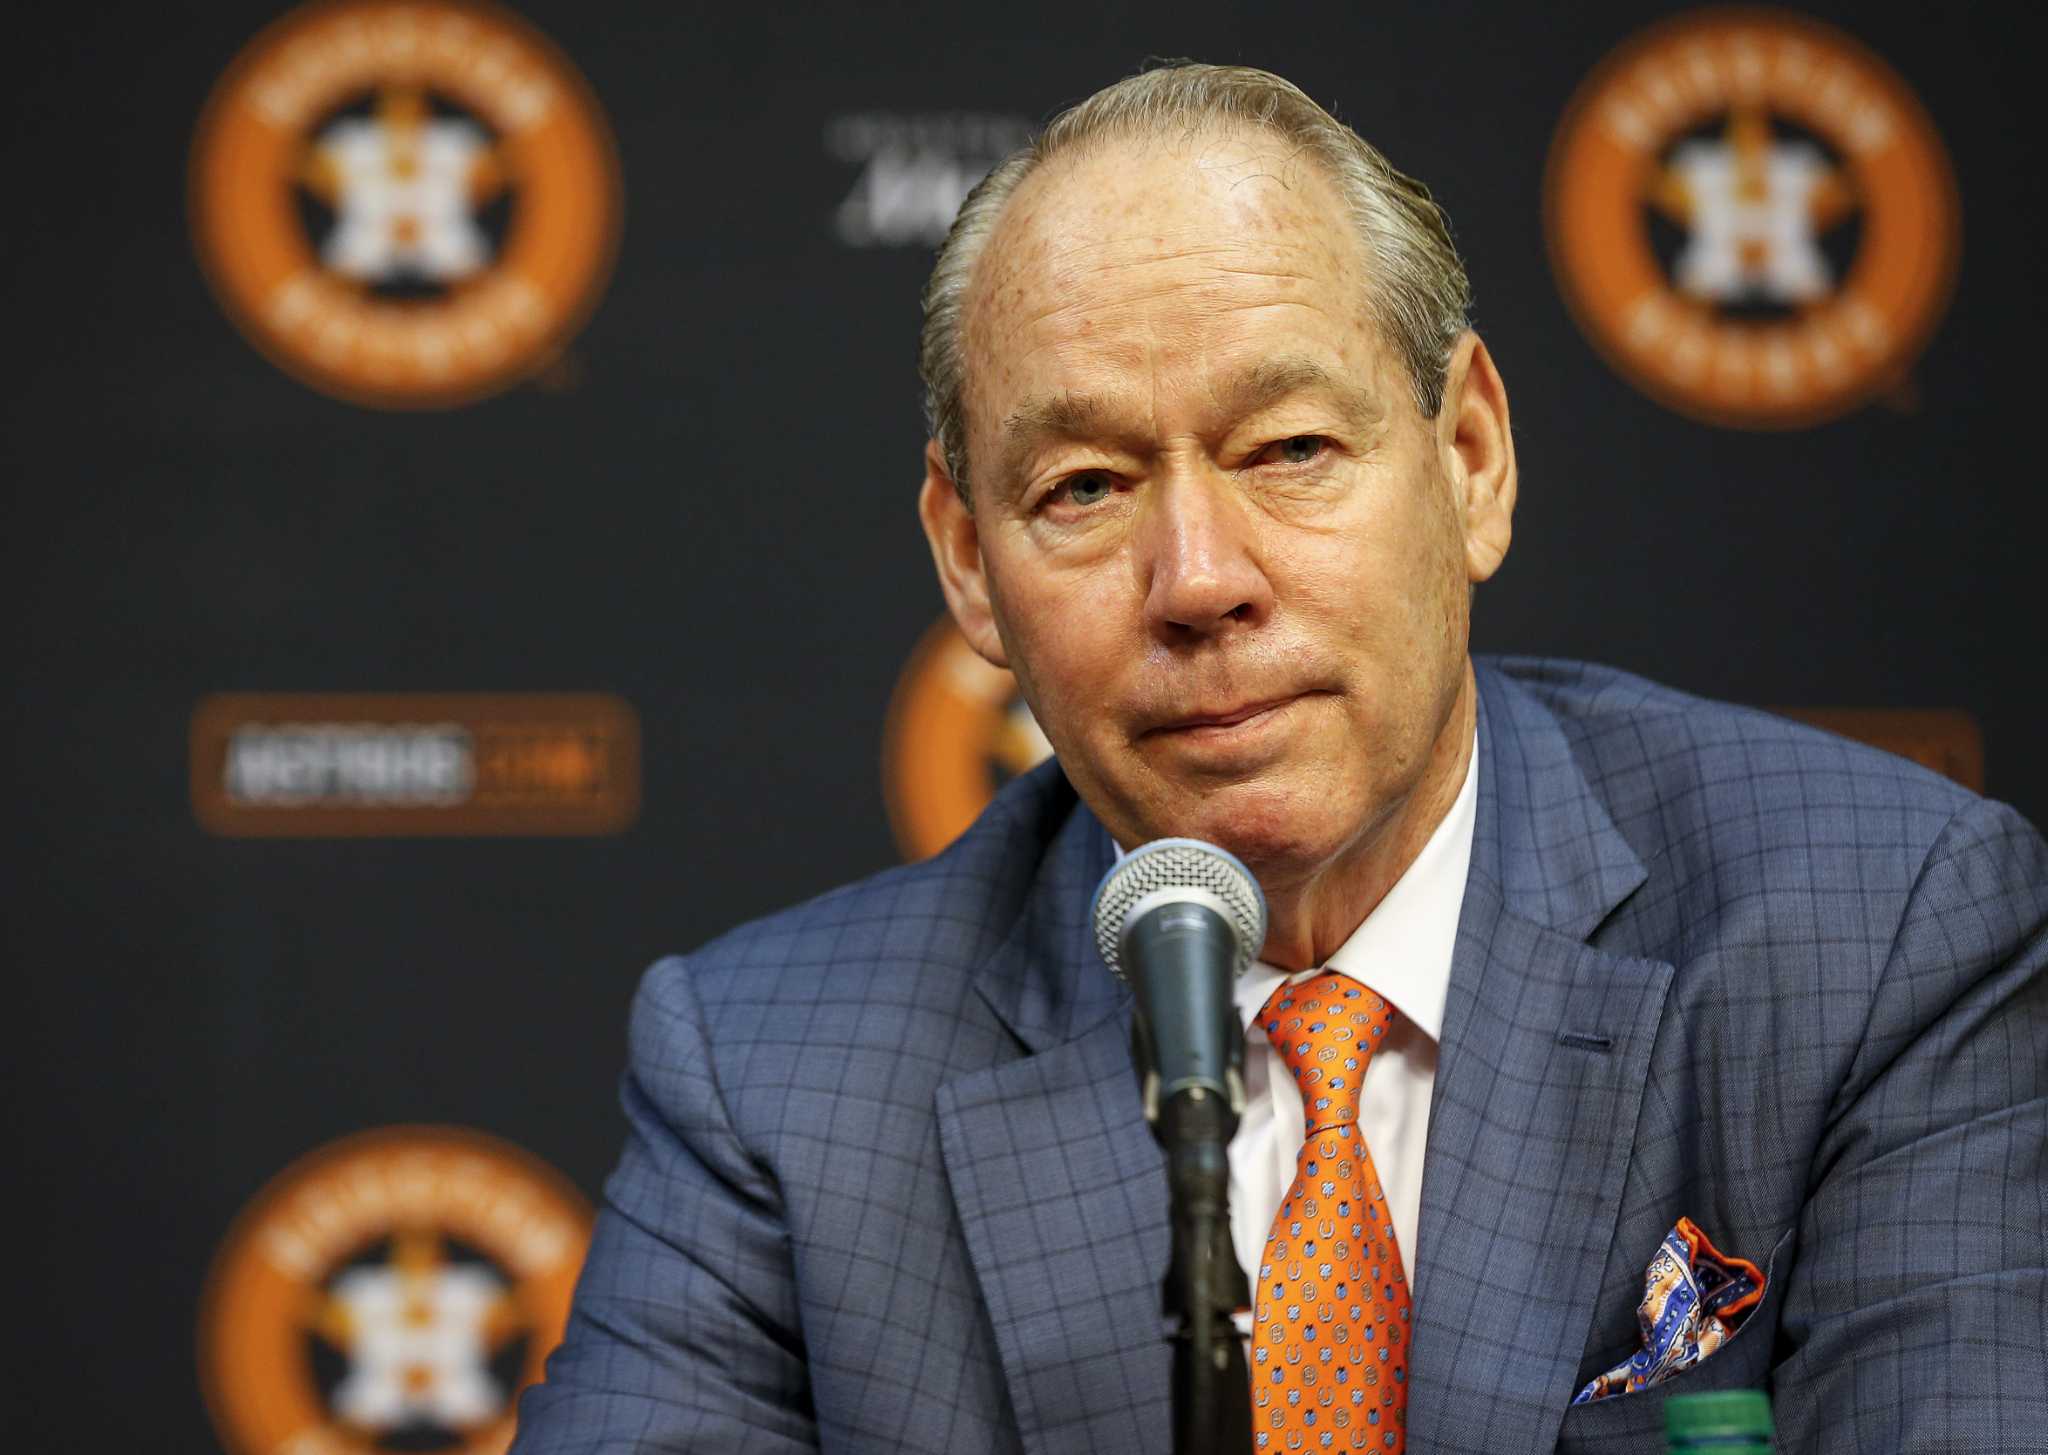 Smith: The people have spoken, Jim Crane. Do whatever it takes to